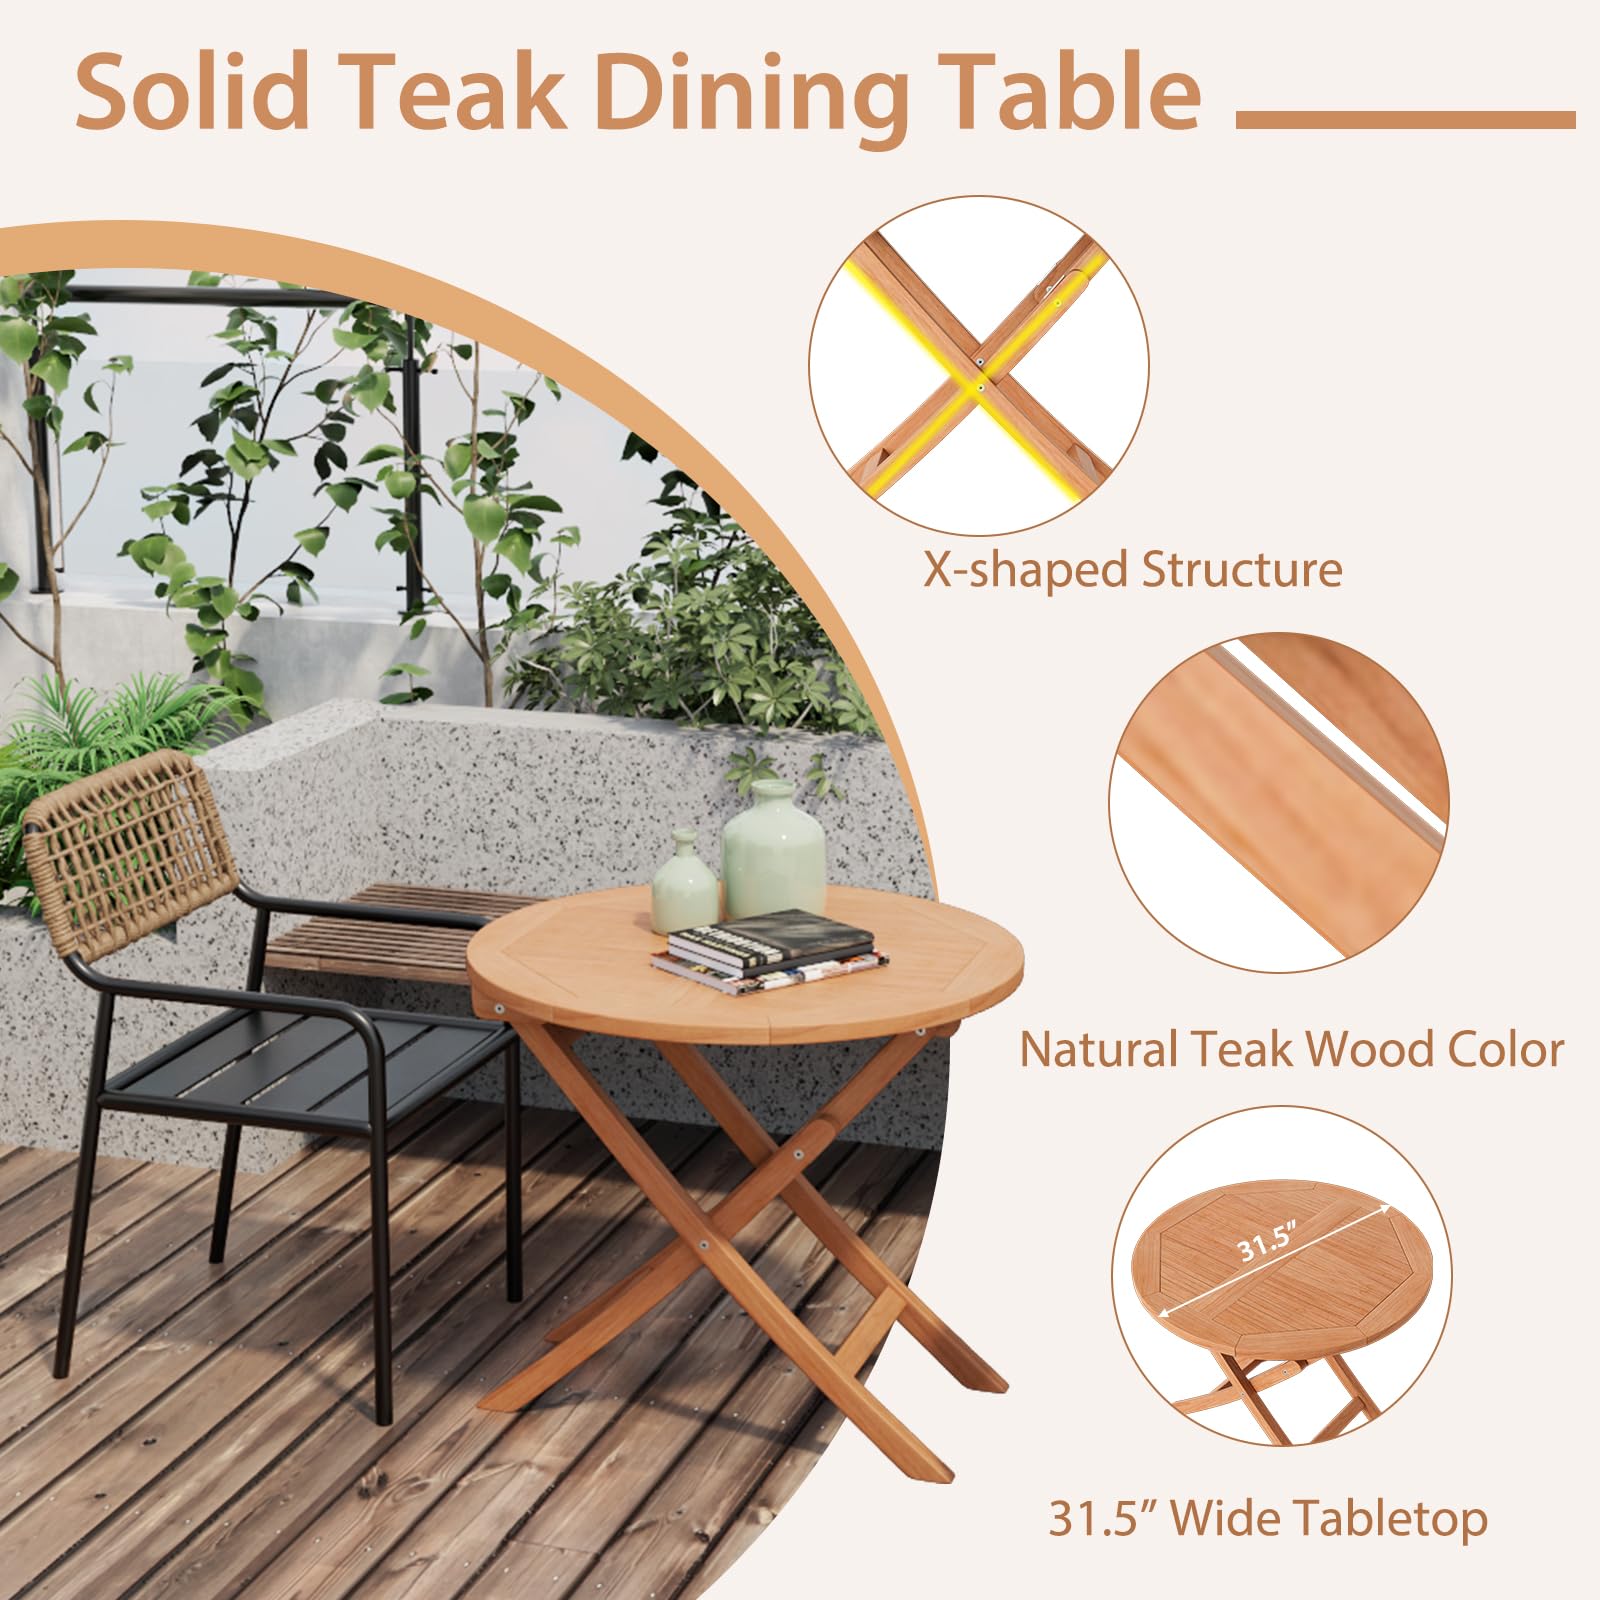 Giantex 31.5” Outdoor Folding Table, Patio Solid Teak Dining Table with Natural Appearance, Space-Saving Design